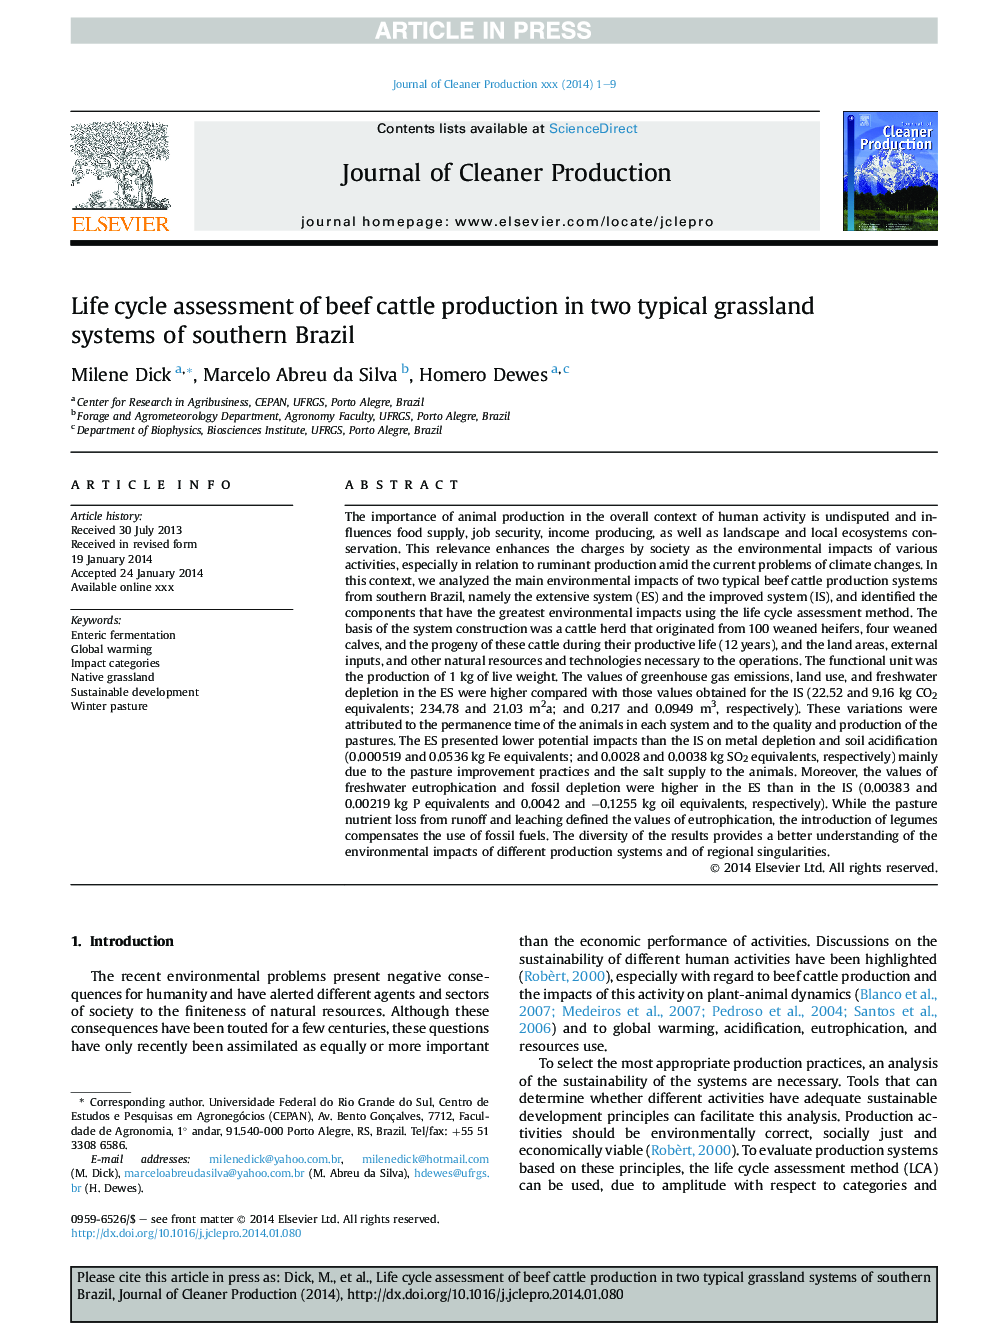 Life cycle assessment of beef cattle production in two typical grassland systems of southern Brazil